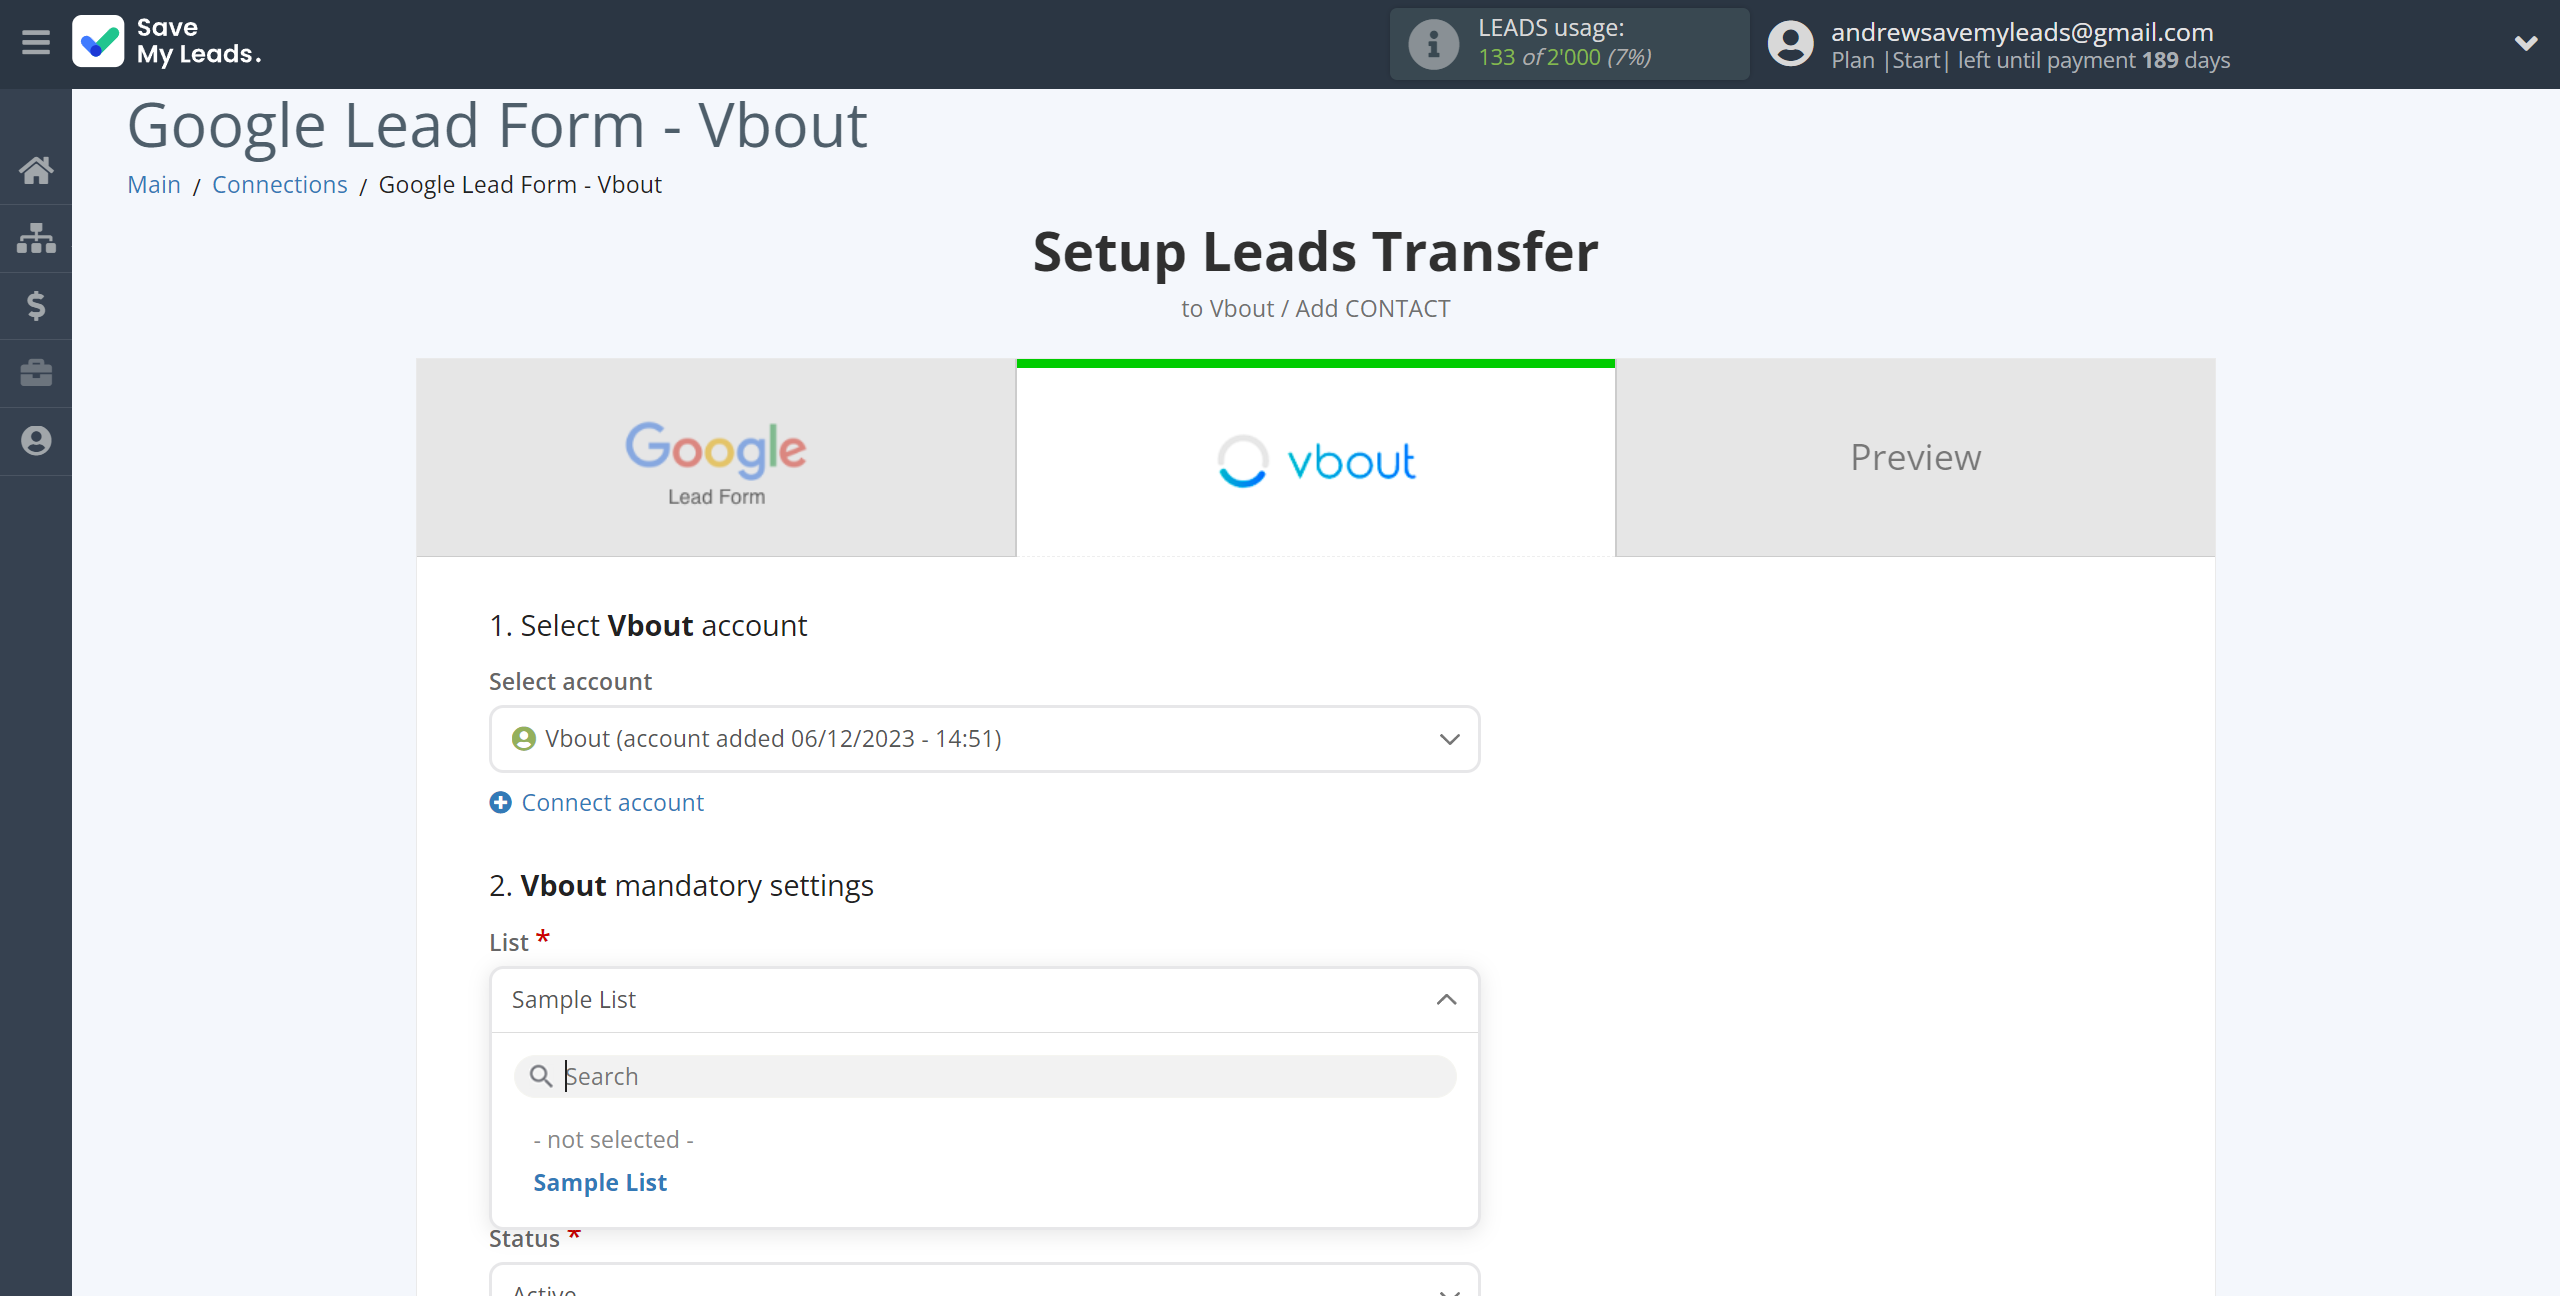 How to Connect Google Lead Form with Vbout Add Contact | Assigning fields